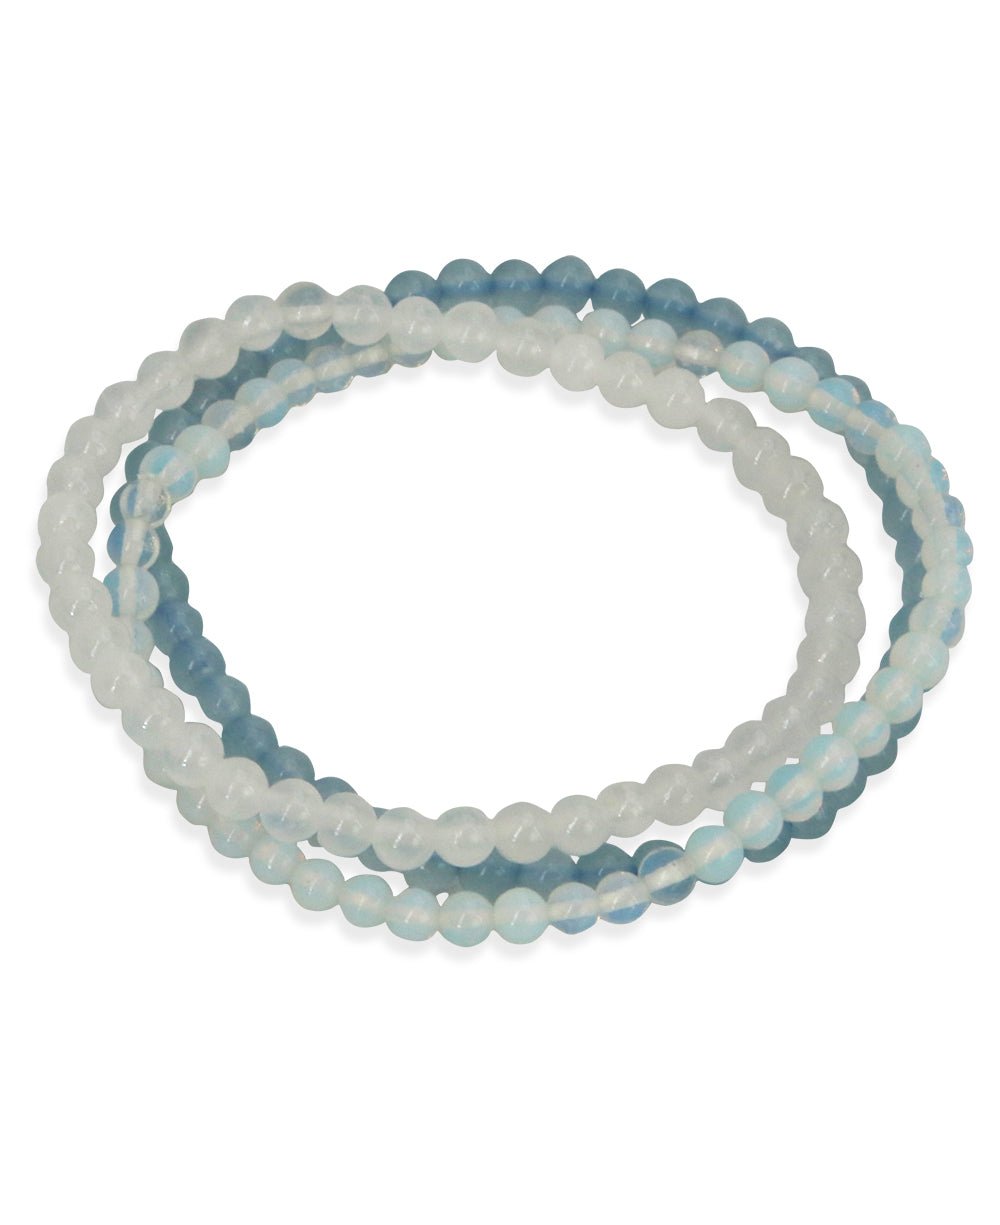 Energy Bracelets for Cleansing and Clarity, Set of 3 - Bracelets